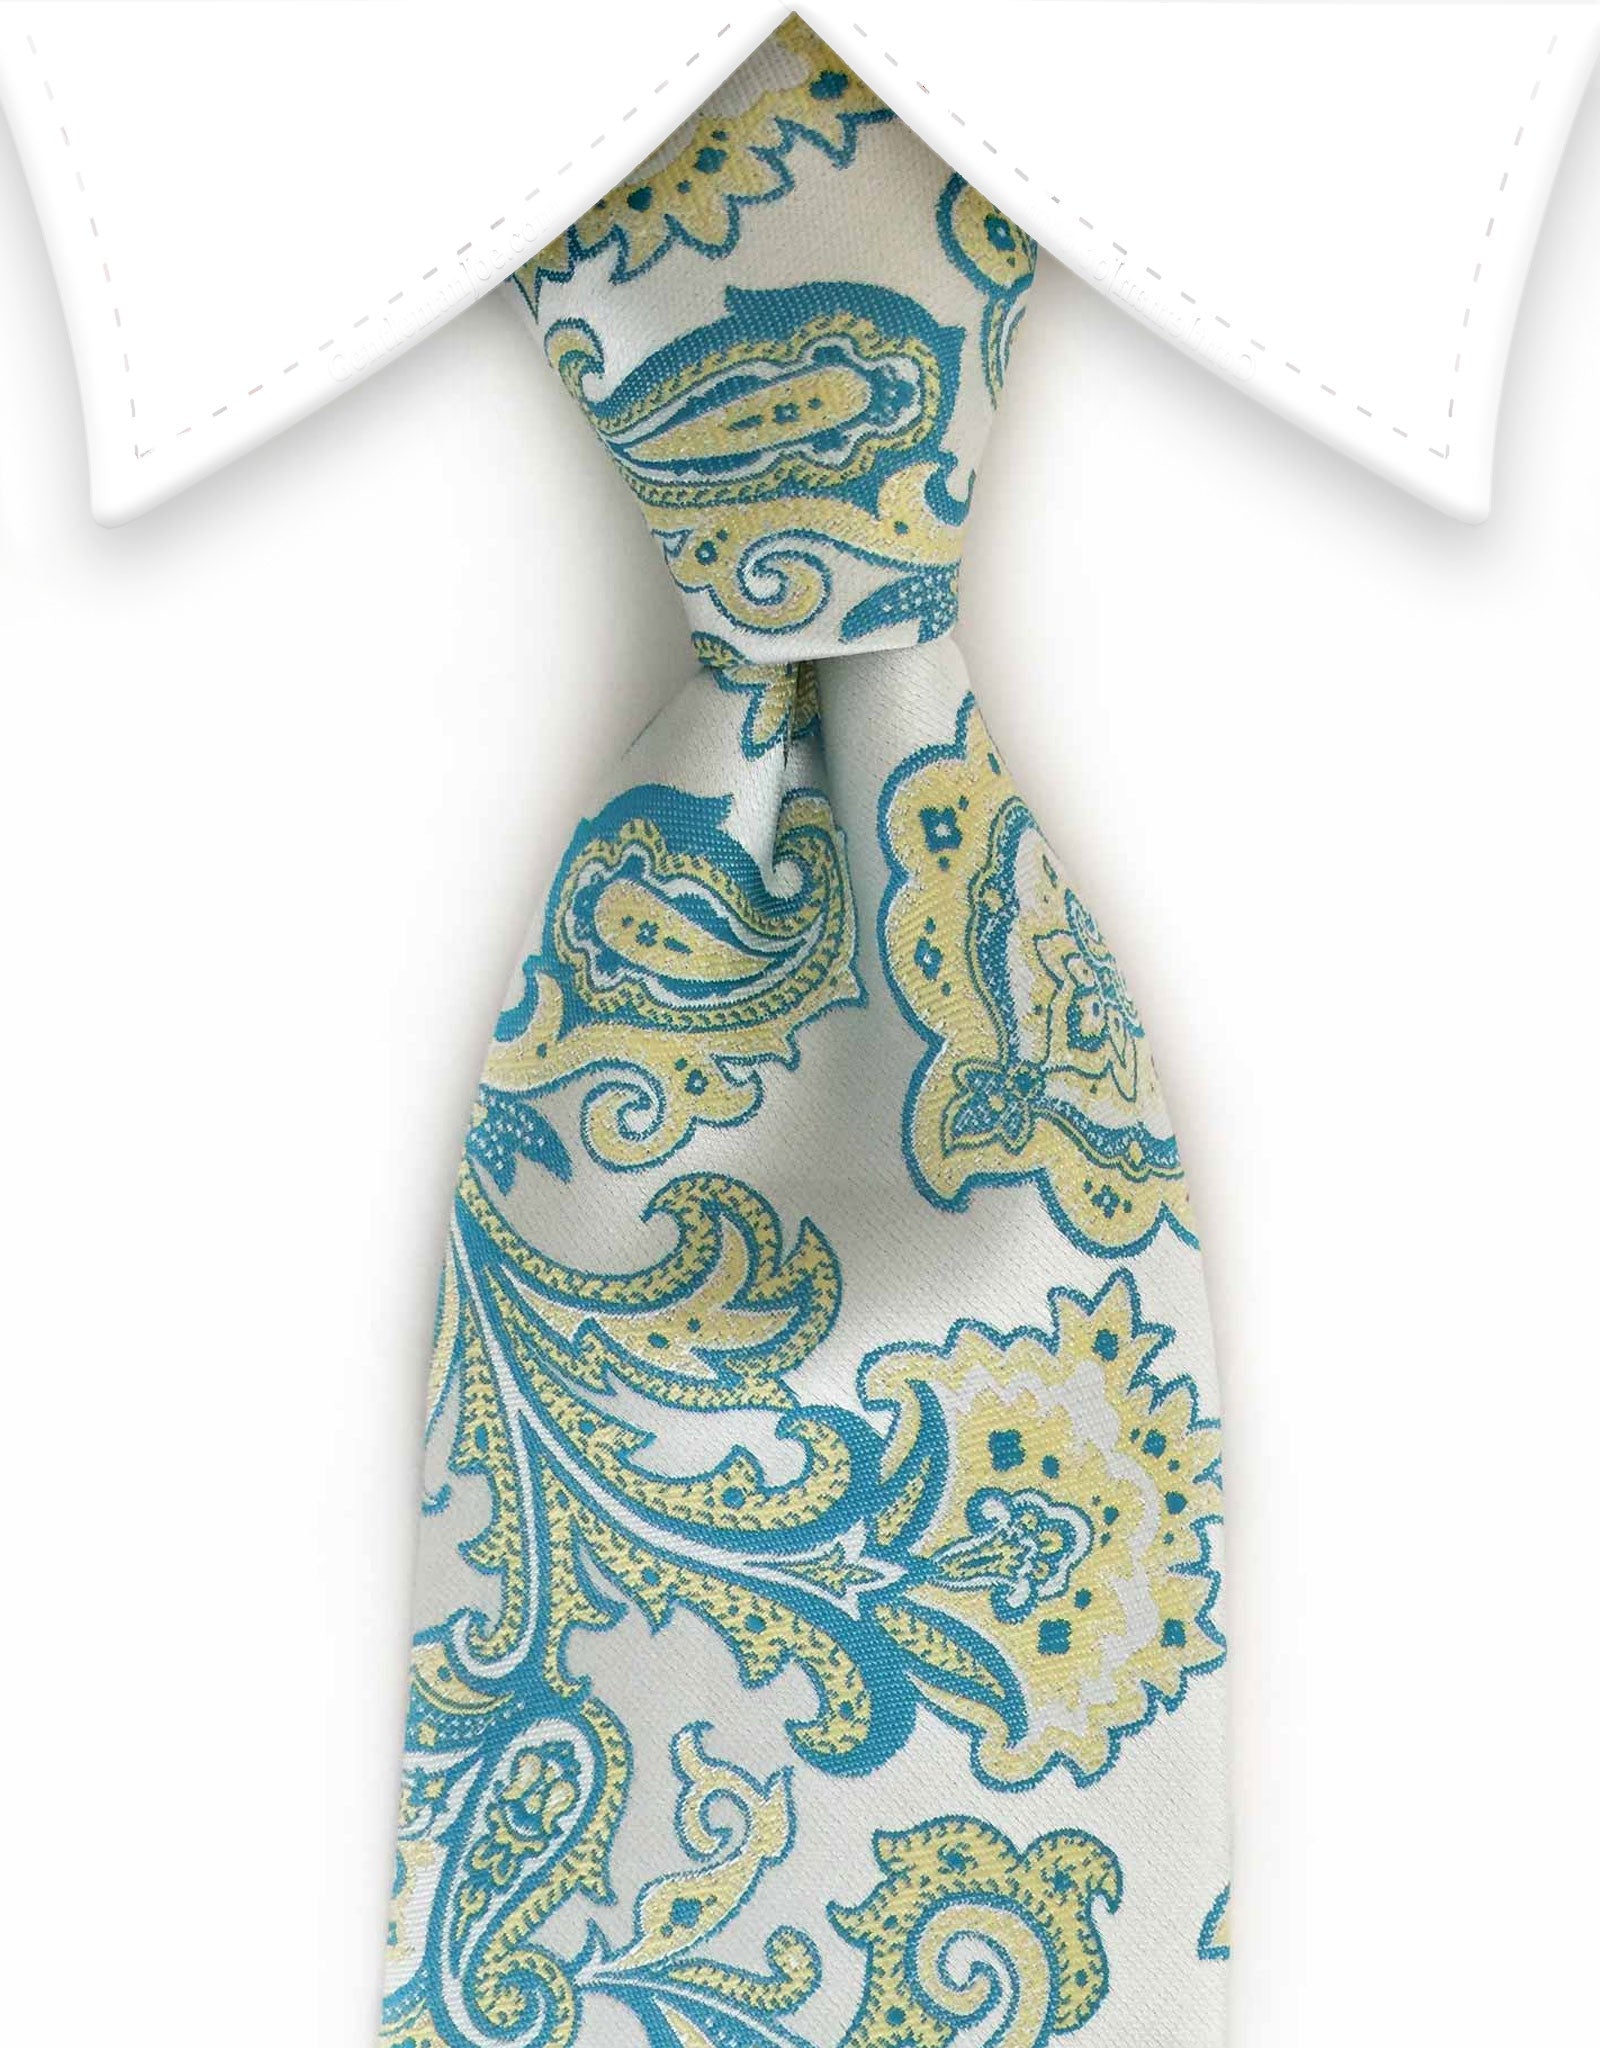 Soft teal & pale yellow floral tie